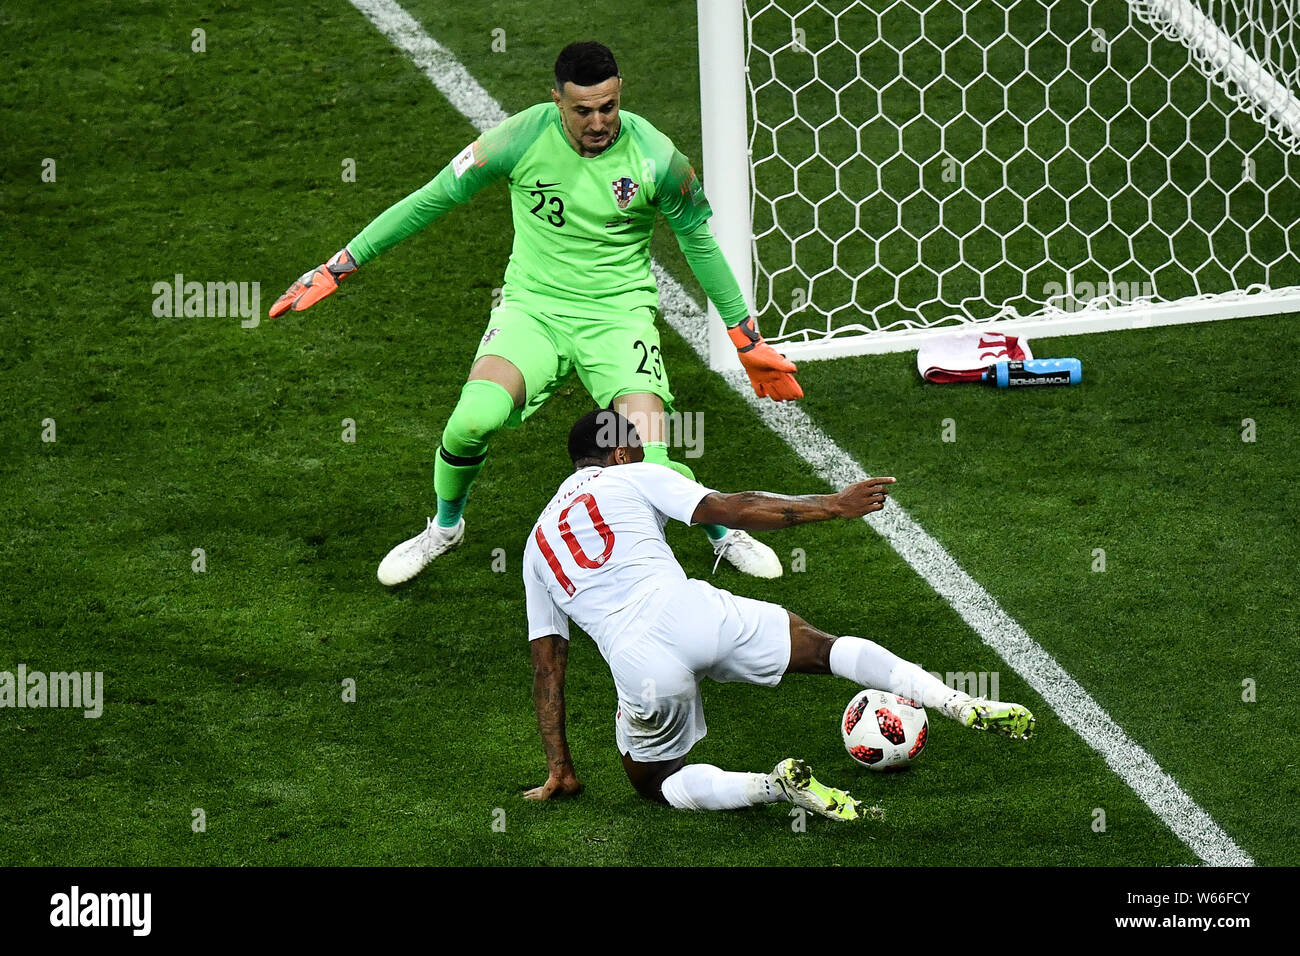 Raheem Sterling of England, front, challenges goalkeeper Danijel Subasic of Croatia in their semifinal match during the 2018 FIFA World Cup in Moscow, Stock Photo